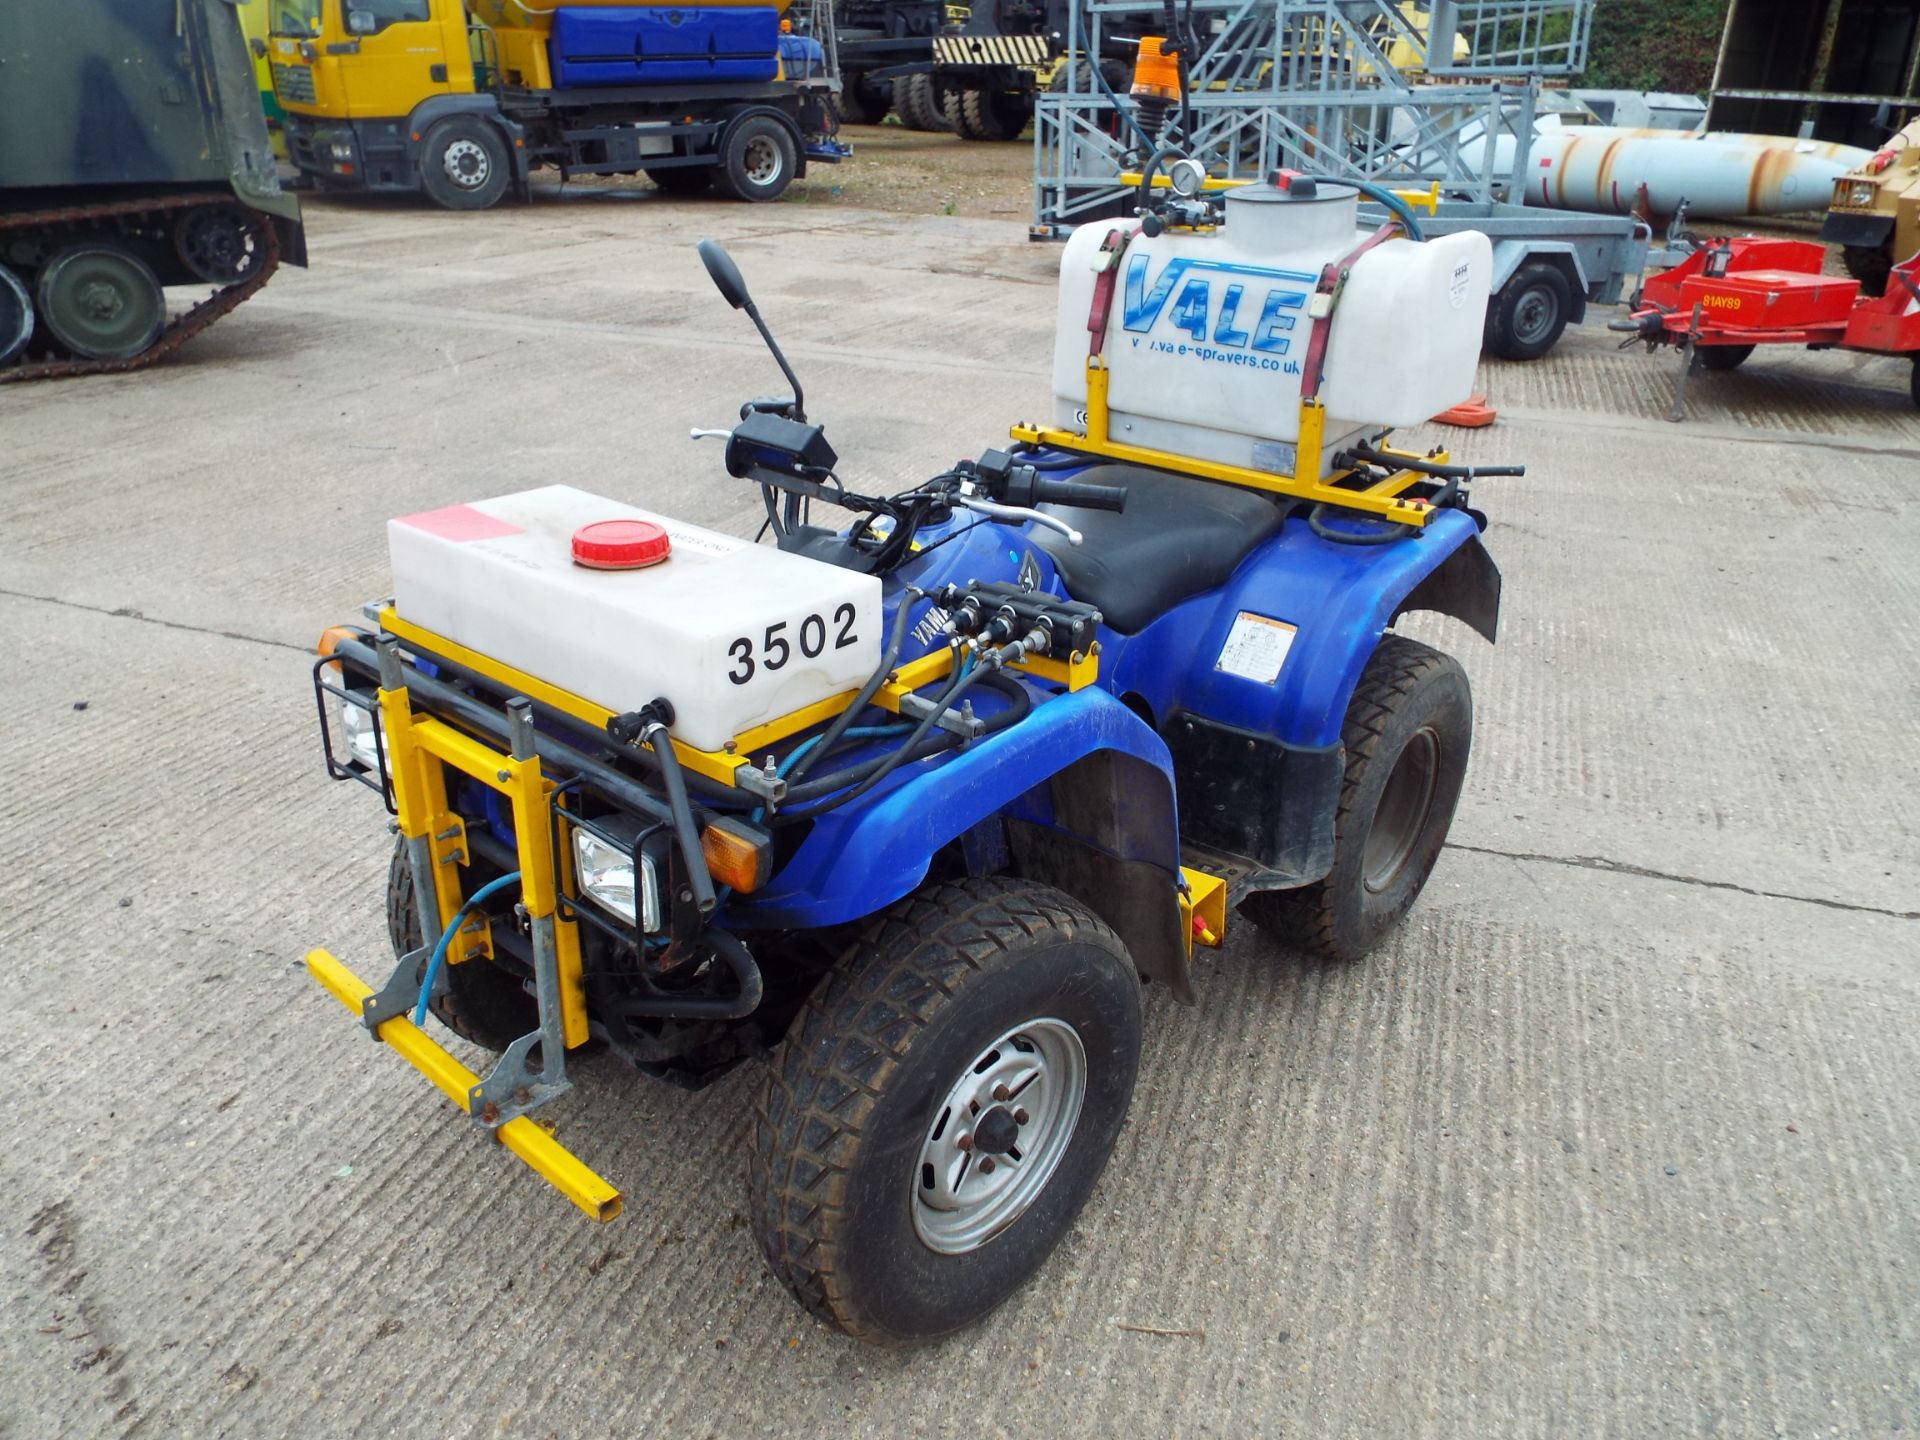 2008 Yamaha Grizzly 350 Ultramatic Quad Bike fitted with Vale Front/Rear Spraying Equipment - Bild 3 aus 26